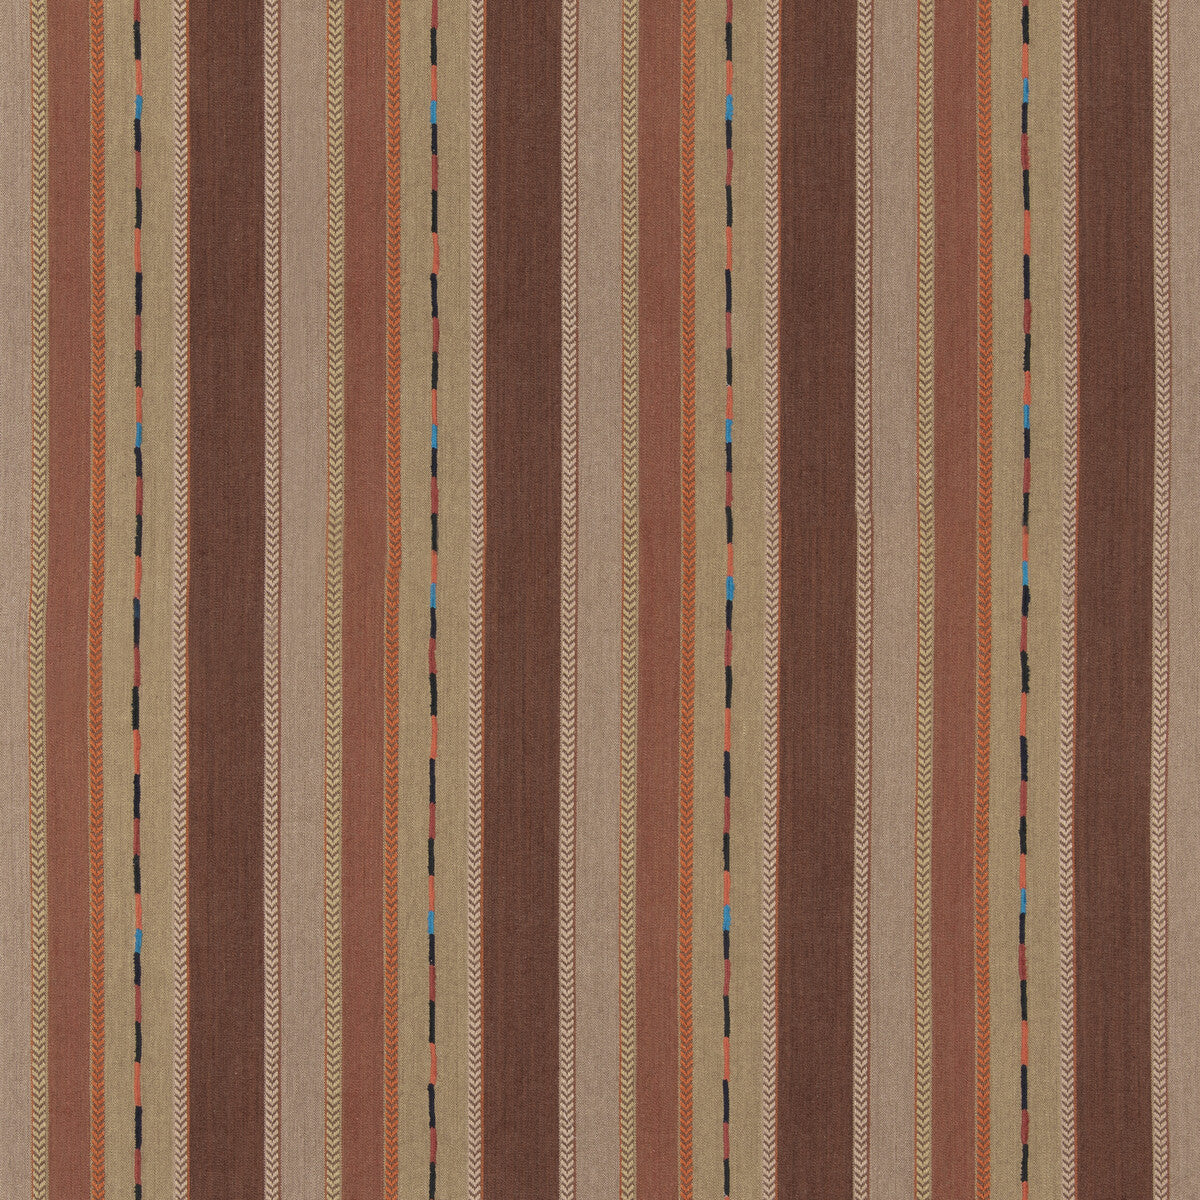 Bunty fabric in brown color - pattern BF11062.5.0 - by G P &amp; J Baker in the X Kit Kemp Stripes collection